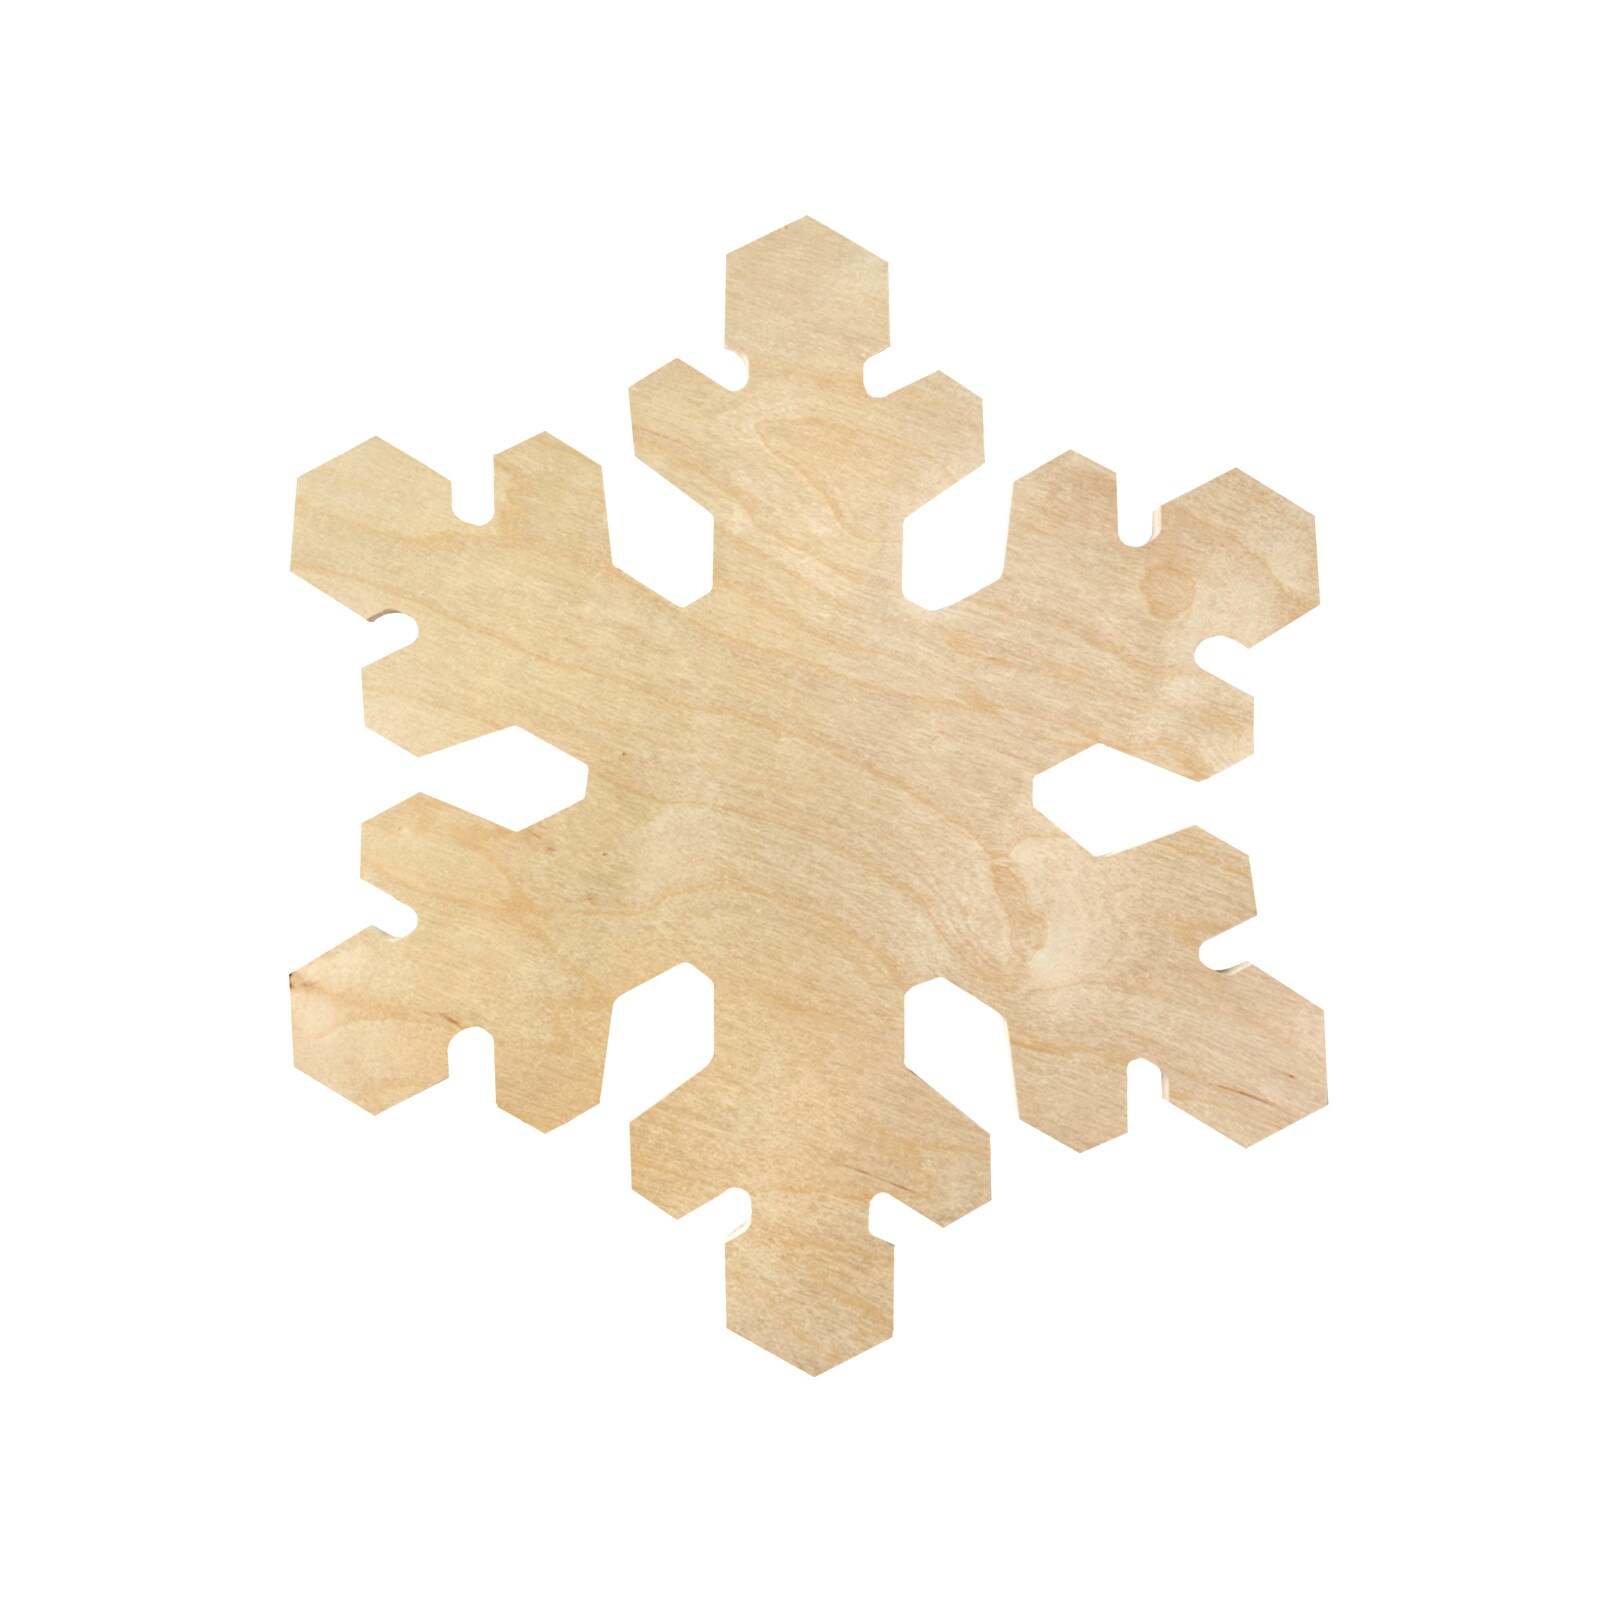 50pcs 20mm Wooden Snowflakes Slices, Colored Wood Snow Shaped